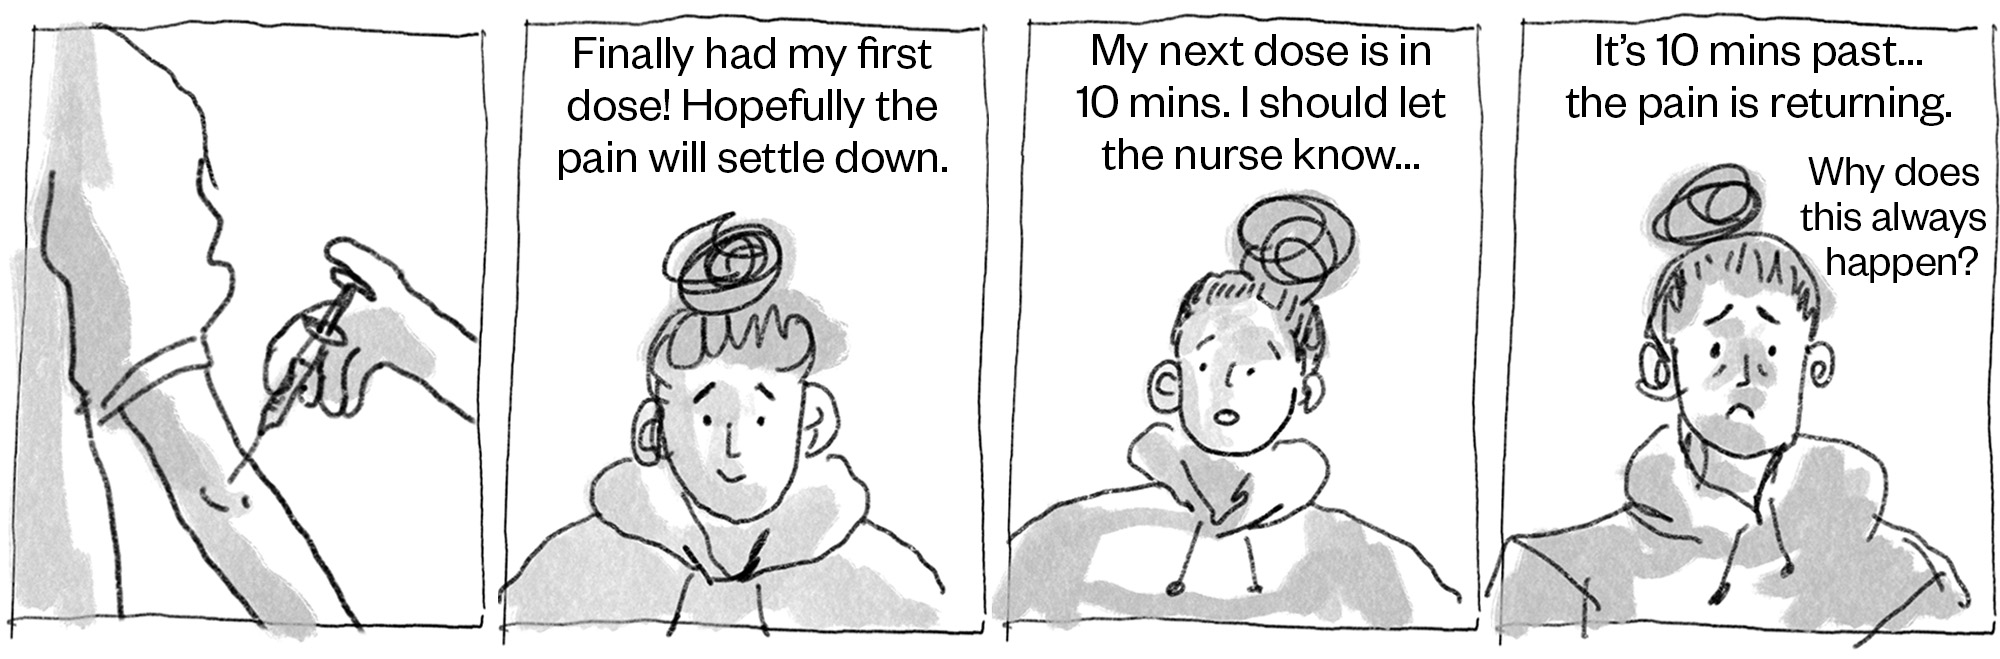 4 comic panels in a row, the first showing an injection, the next three showing reactions as the woman slowly declines as she has to wait for a follow-up.